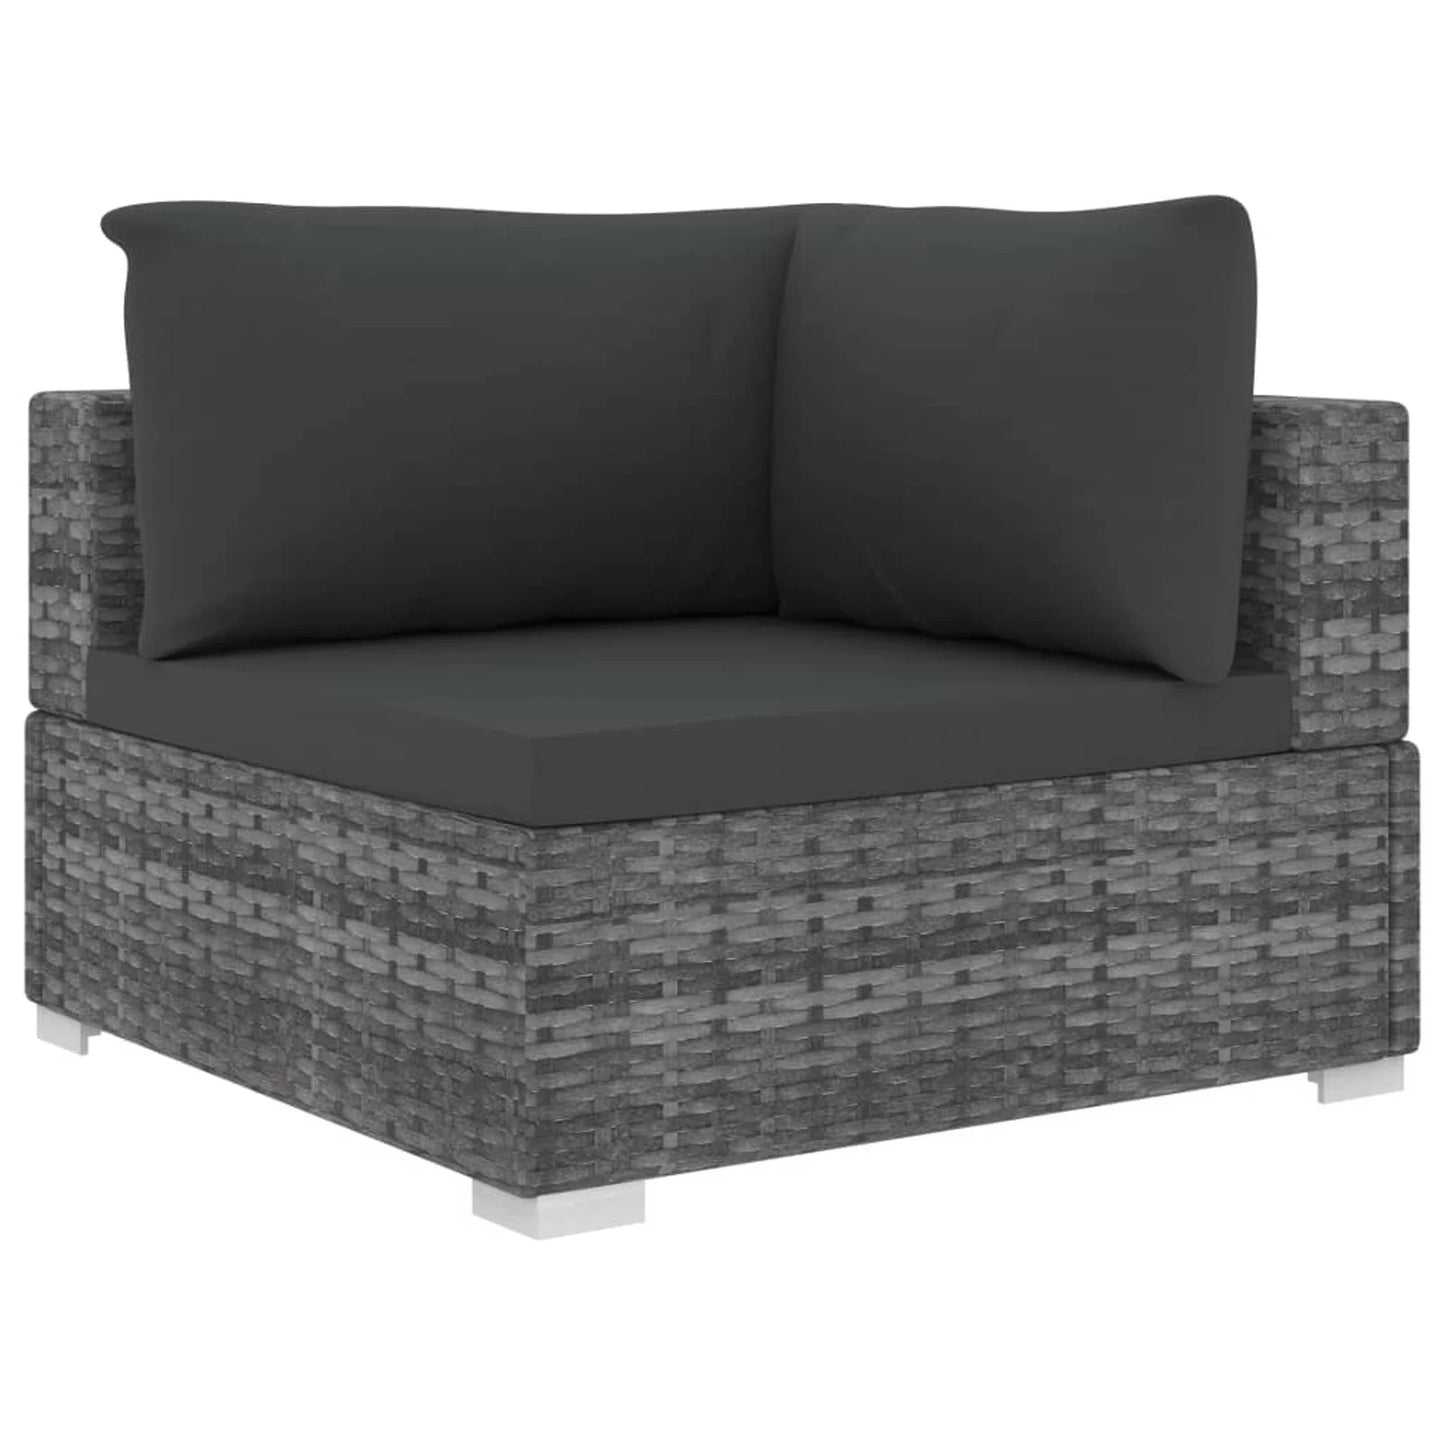 12 Piece Patio Set with Cushions Poly Rattan Gray